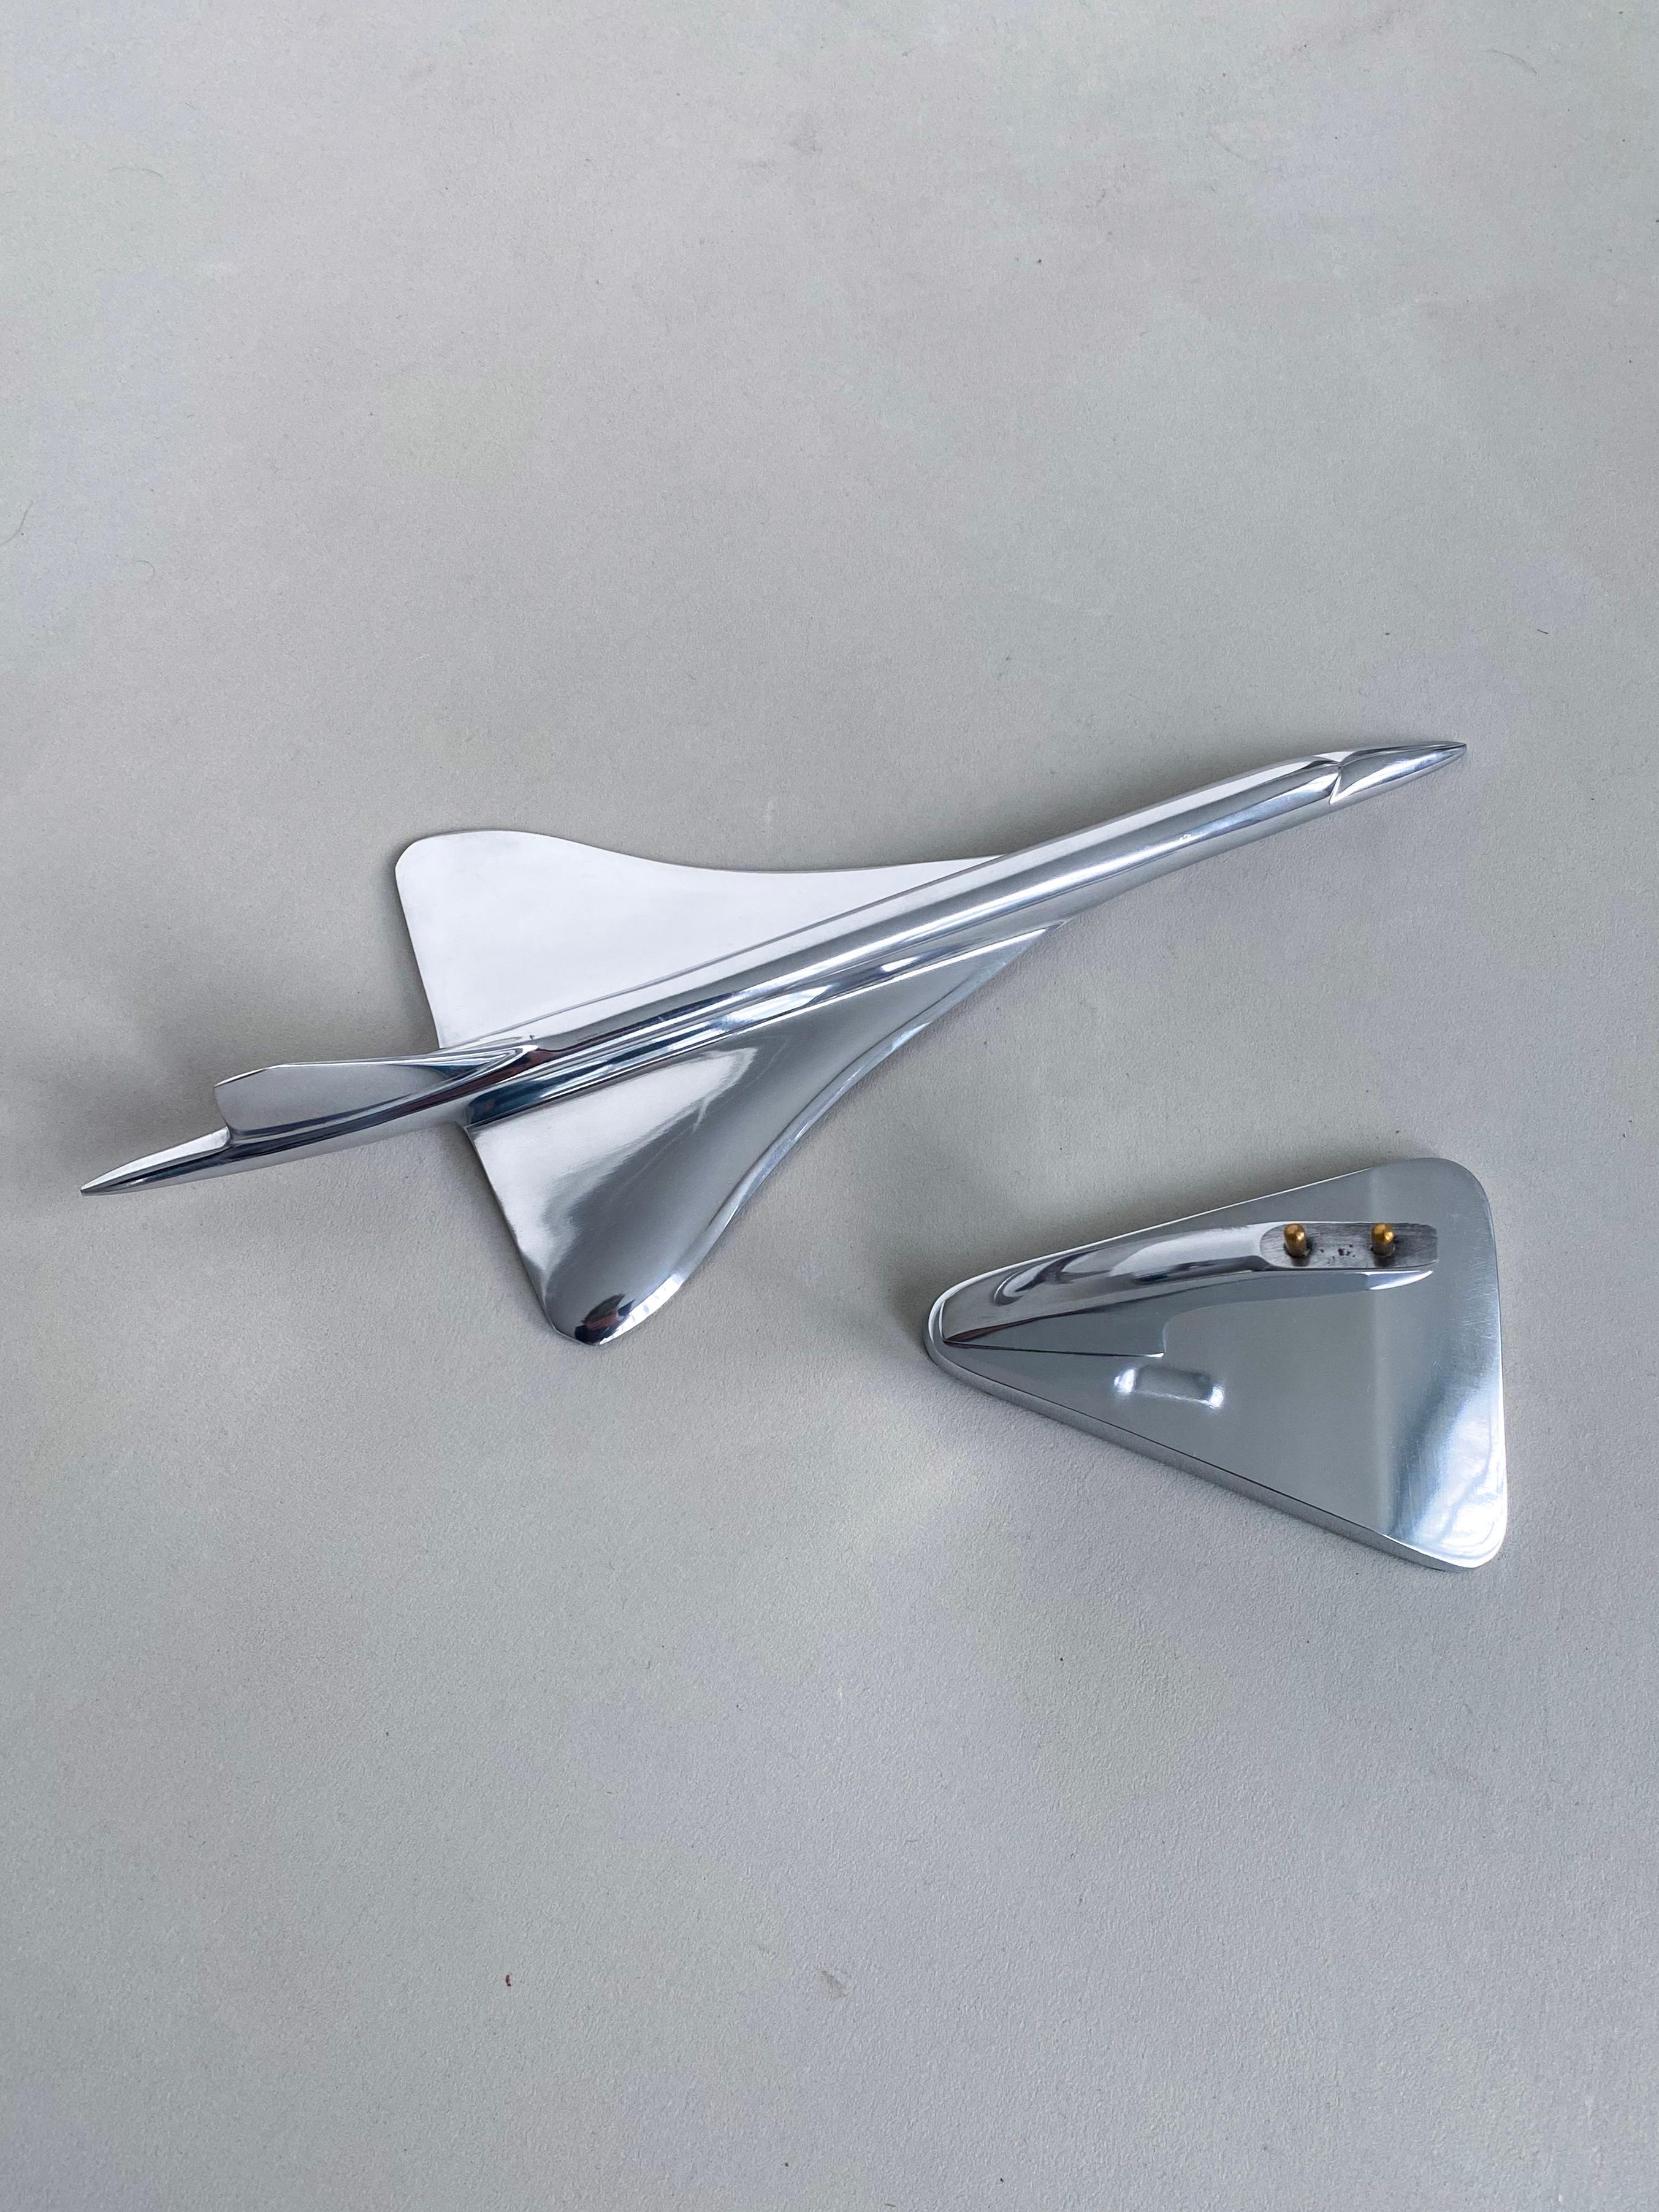 Concorde Supersonic Plane Display Mounted Sculpture in Polished Stainless Steel For Sale 2